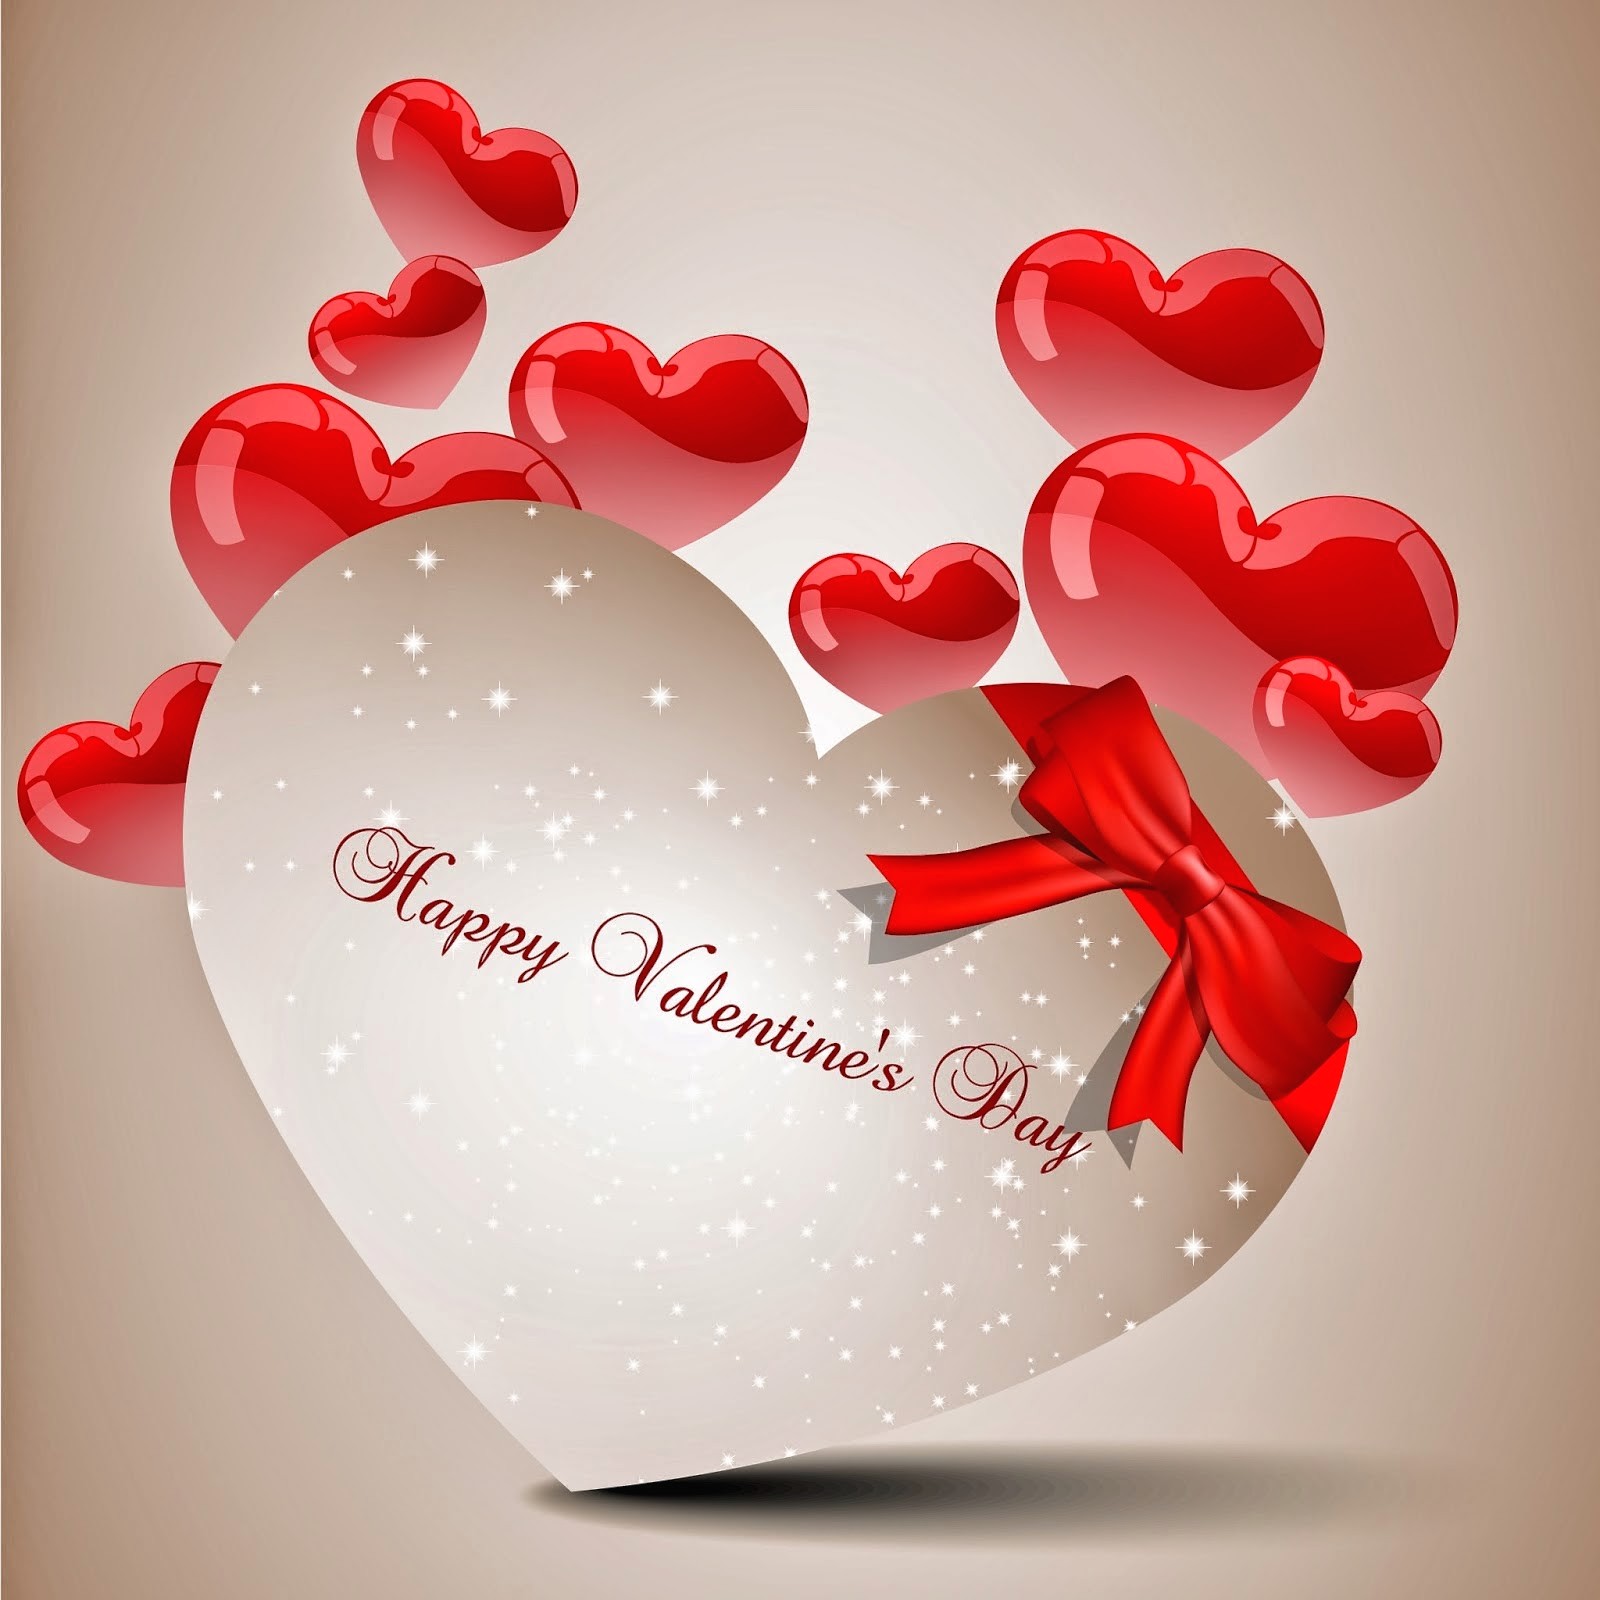 Valentine E2 80 99s Day Images For Whatsapp Dp Profile - Happy Valentines Day 2019 , HD Wallpaper & Backgrounds